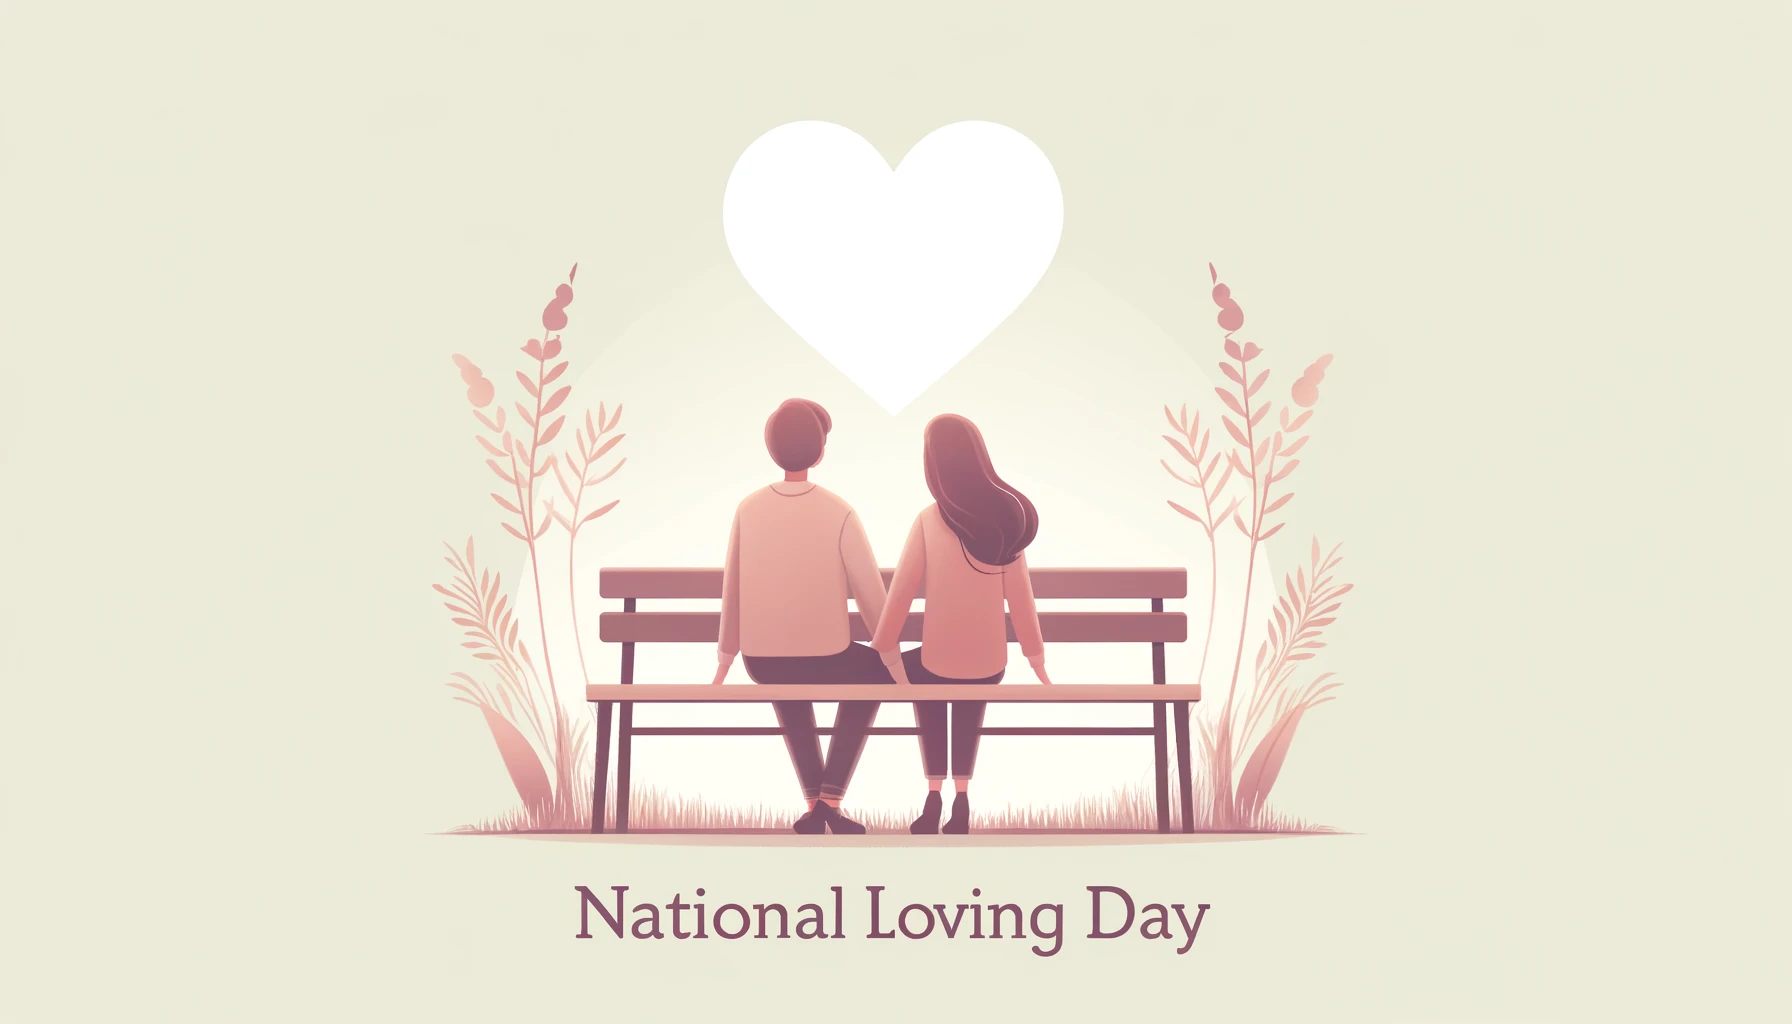 Honor Civil Rights with National Loving Day Greetings